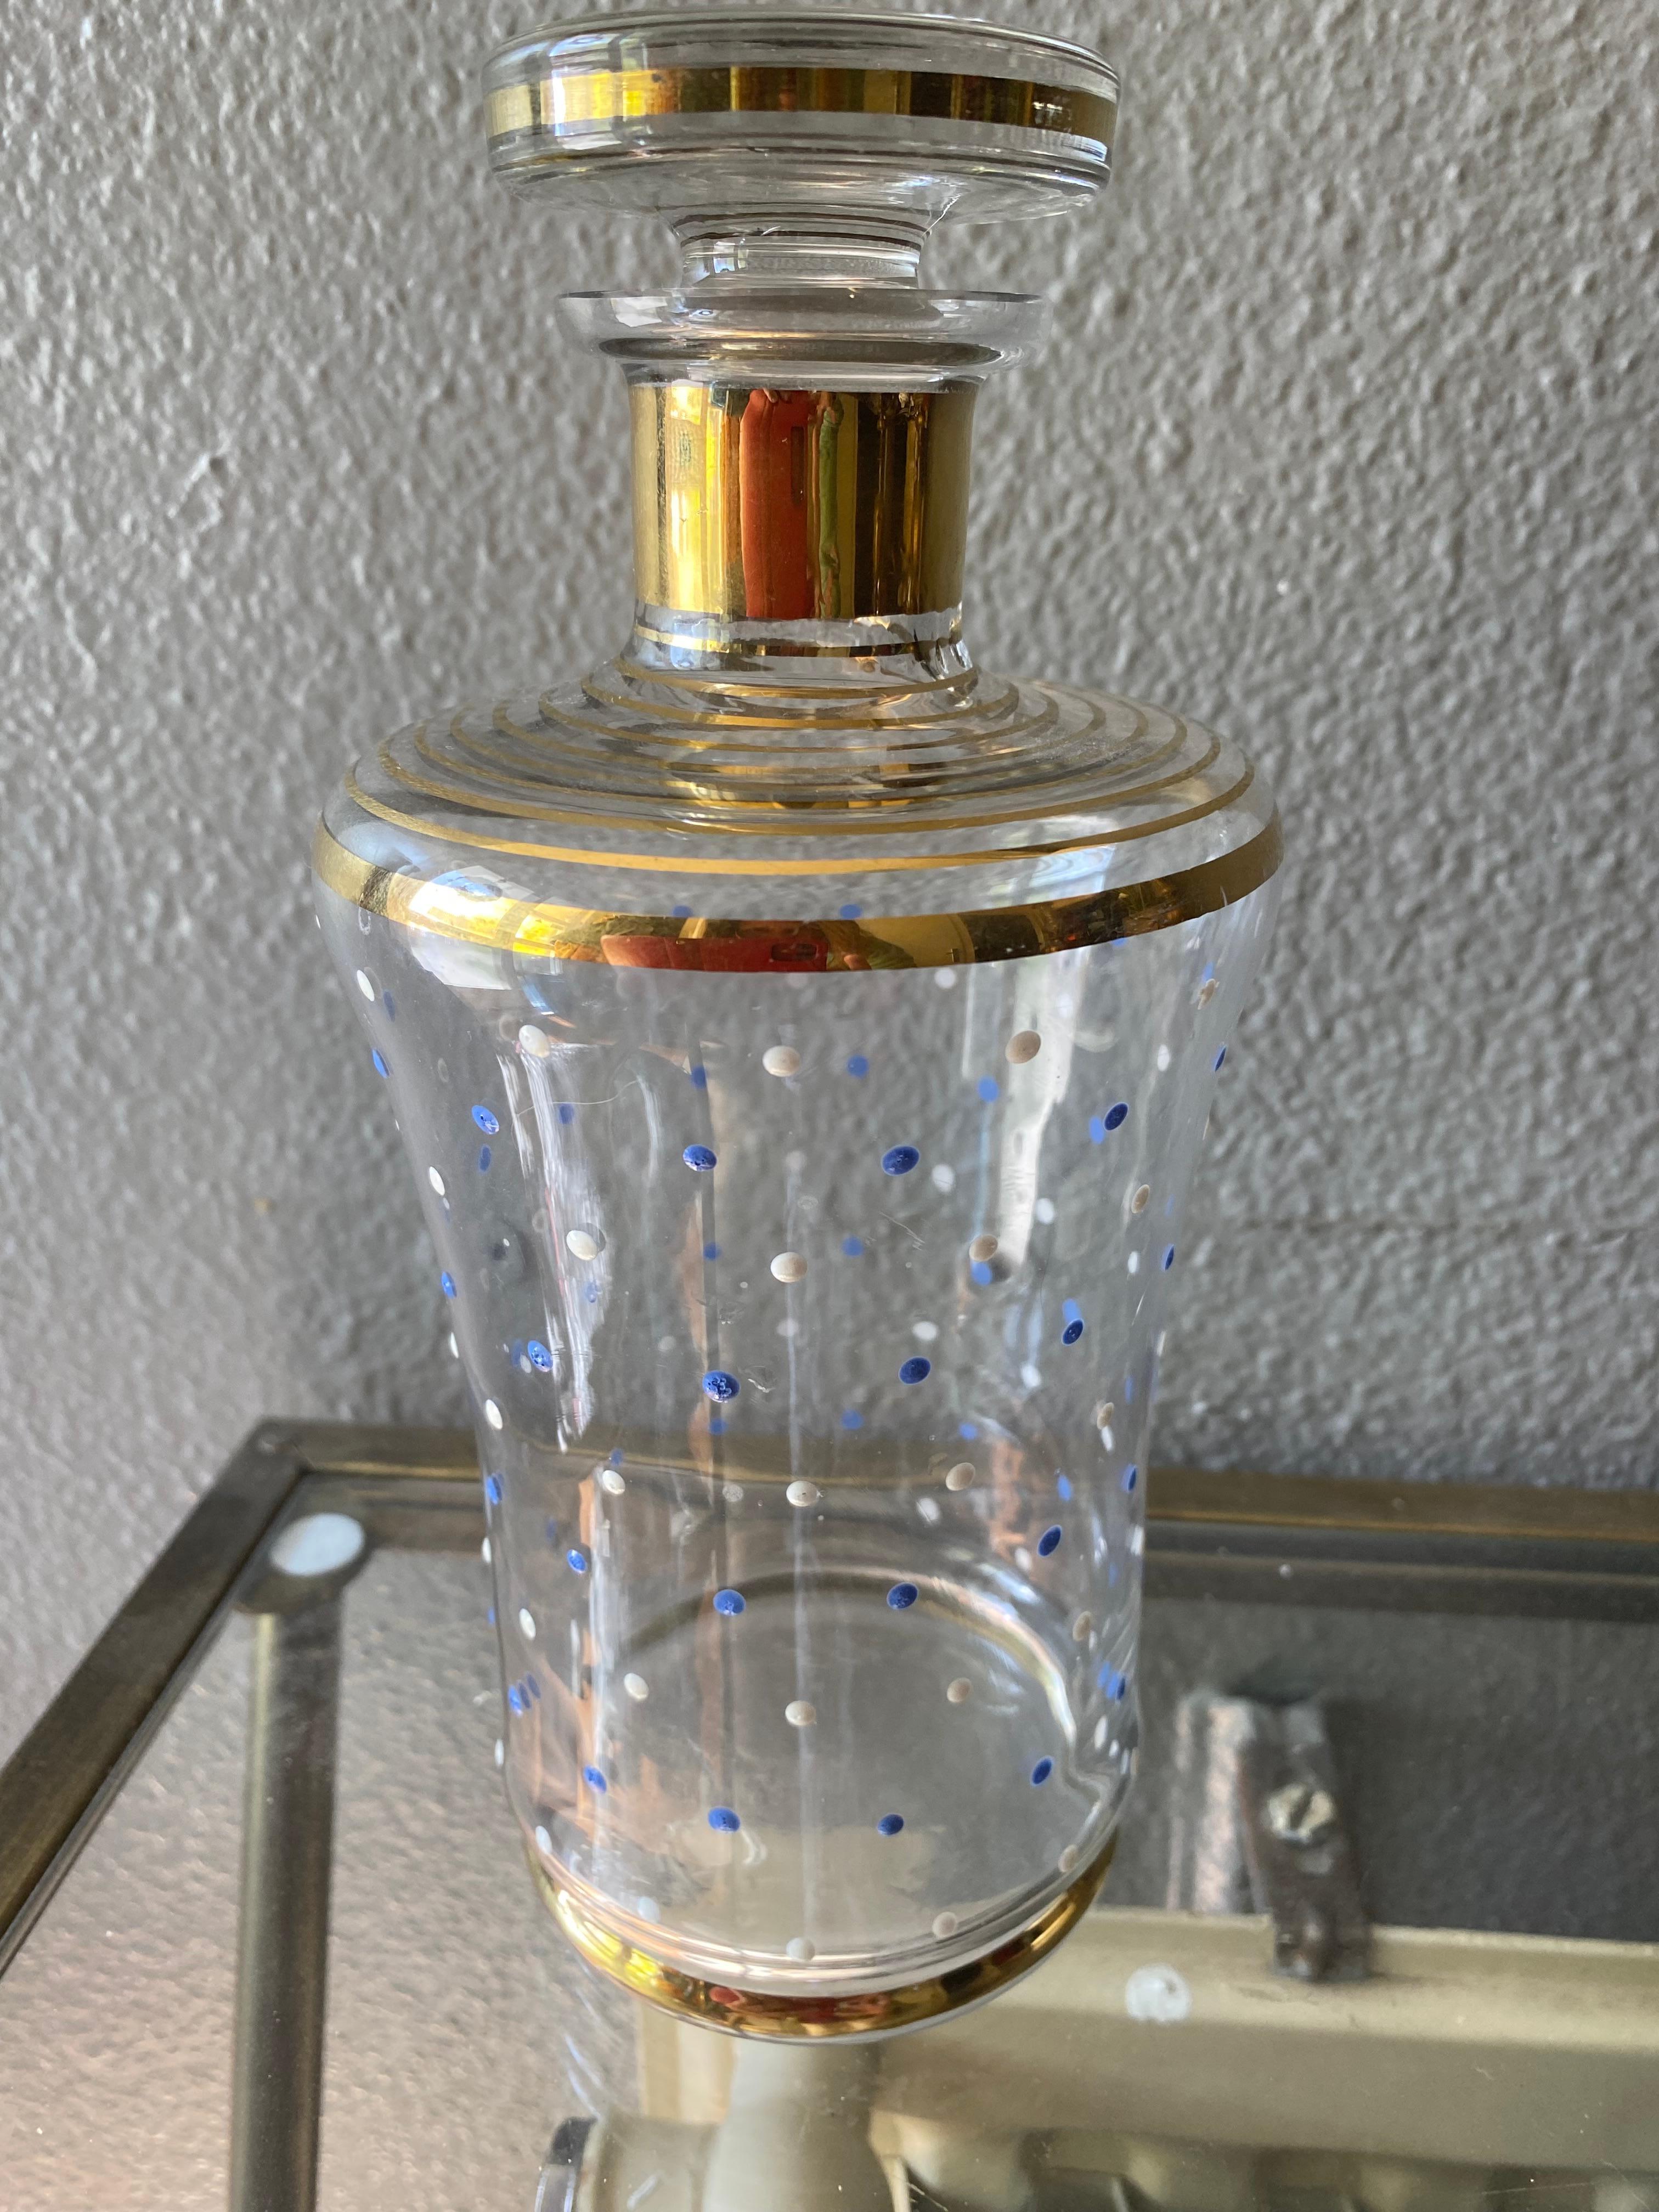 In a good condition beautiful Art Deco carafe with blue and white dots. The carafe is probably from Belgium or France.